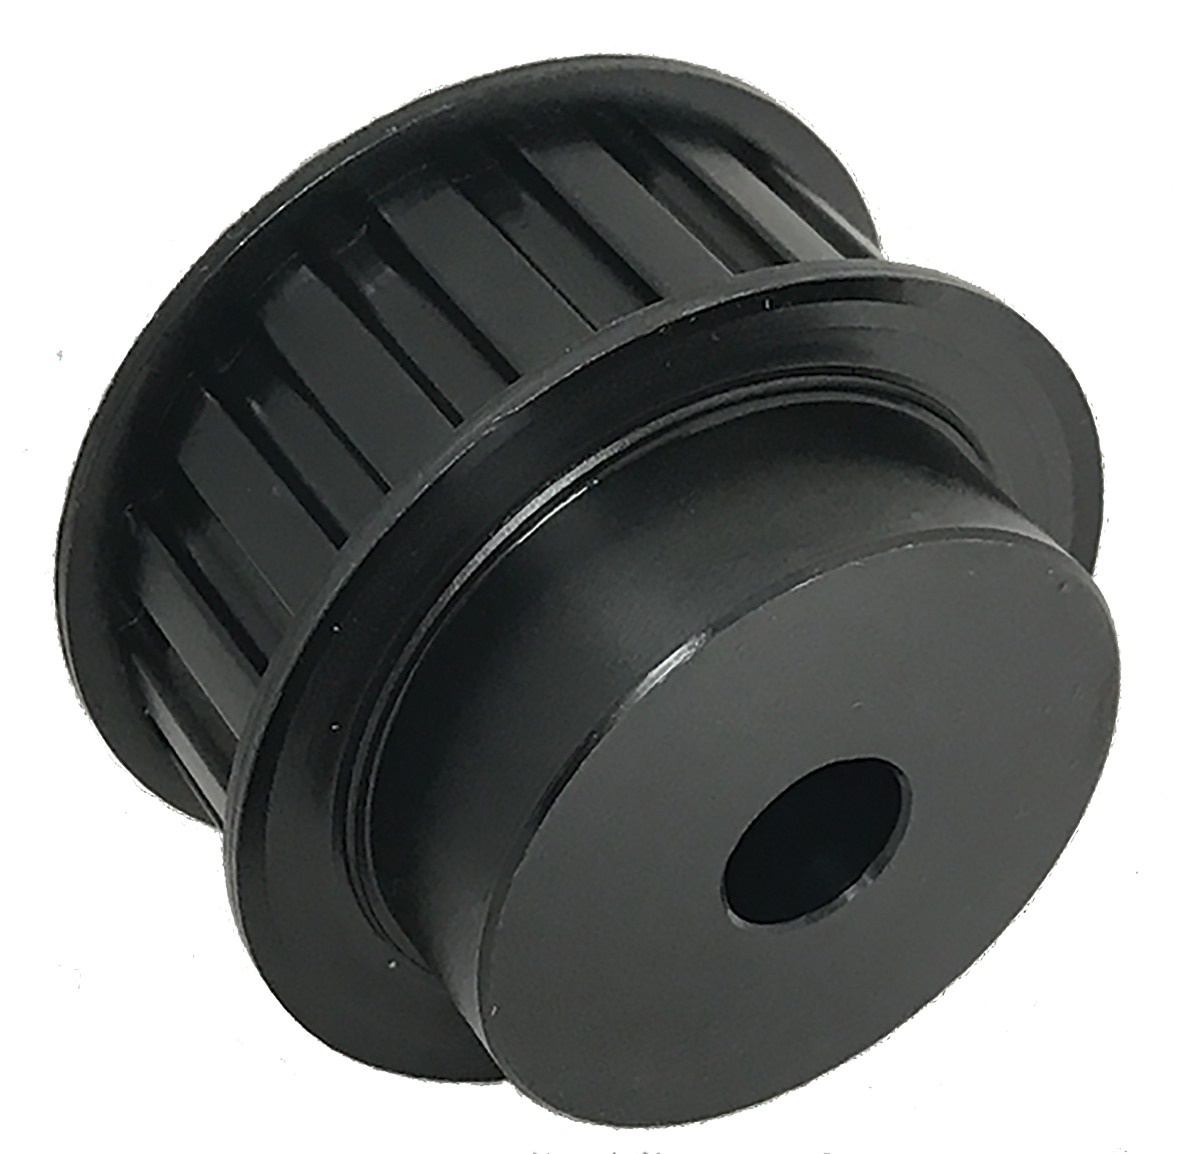 21H100-6FS8 - Steel Imperial Pitch Pulleys